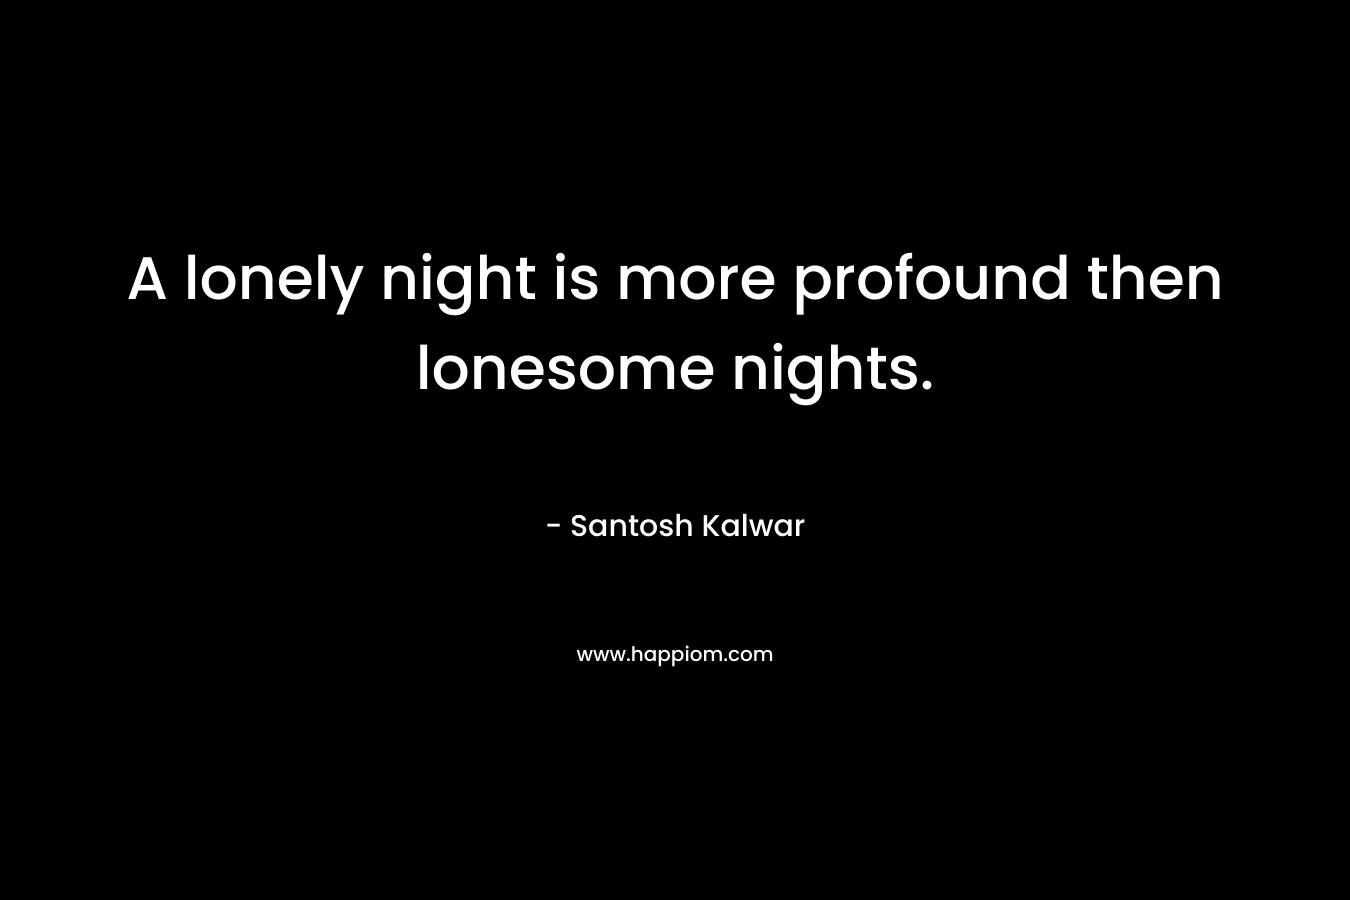 A lonely night is more profound then lonesome nights.